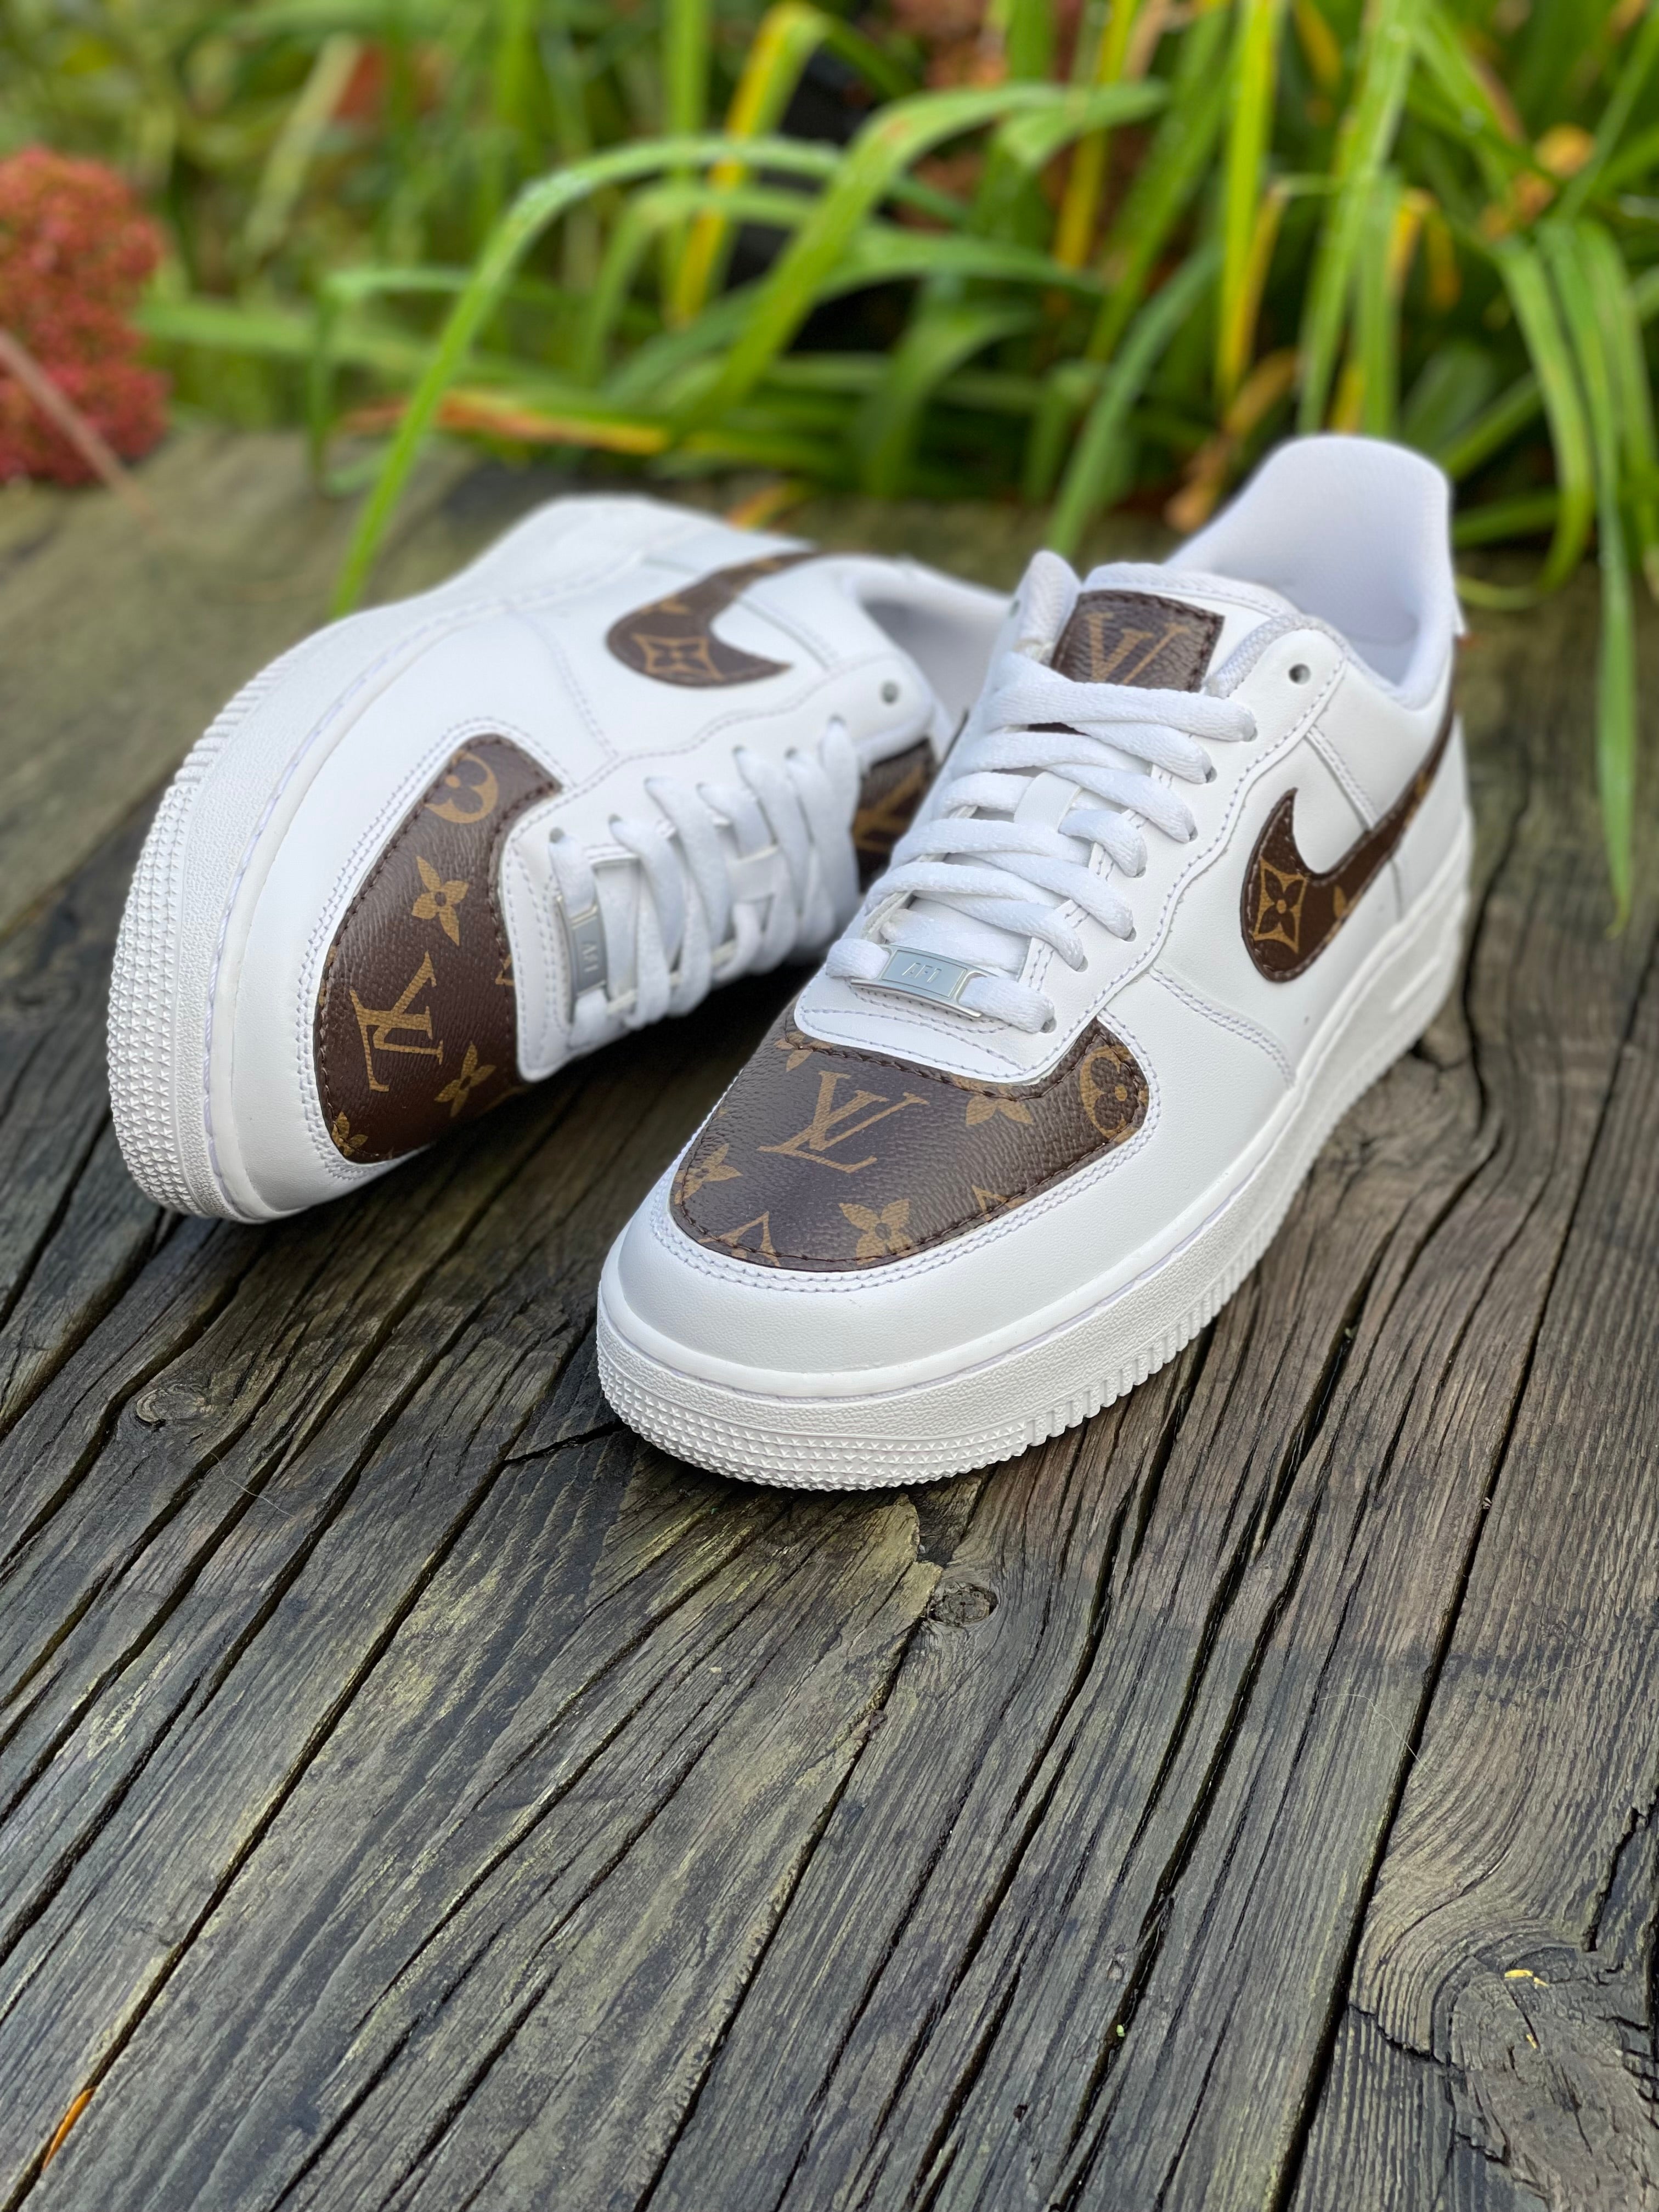 LV CUSTOM Air Force 1’s , Shoes included! , If you